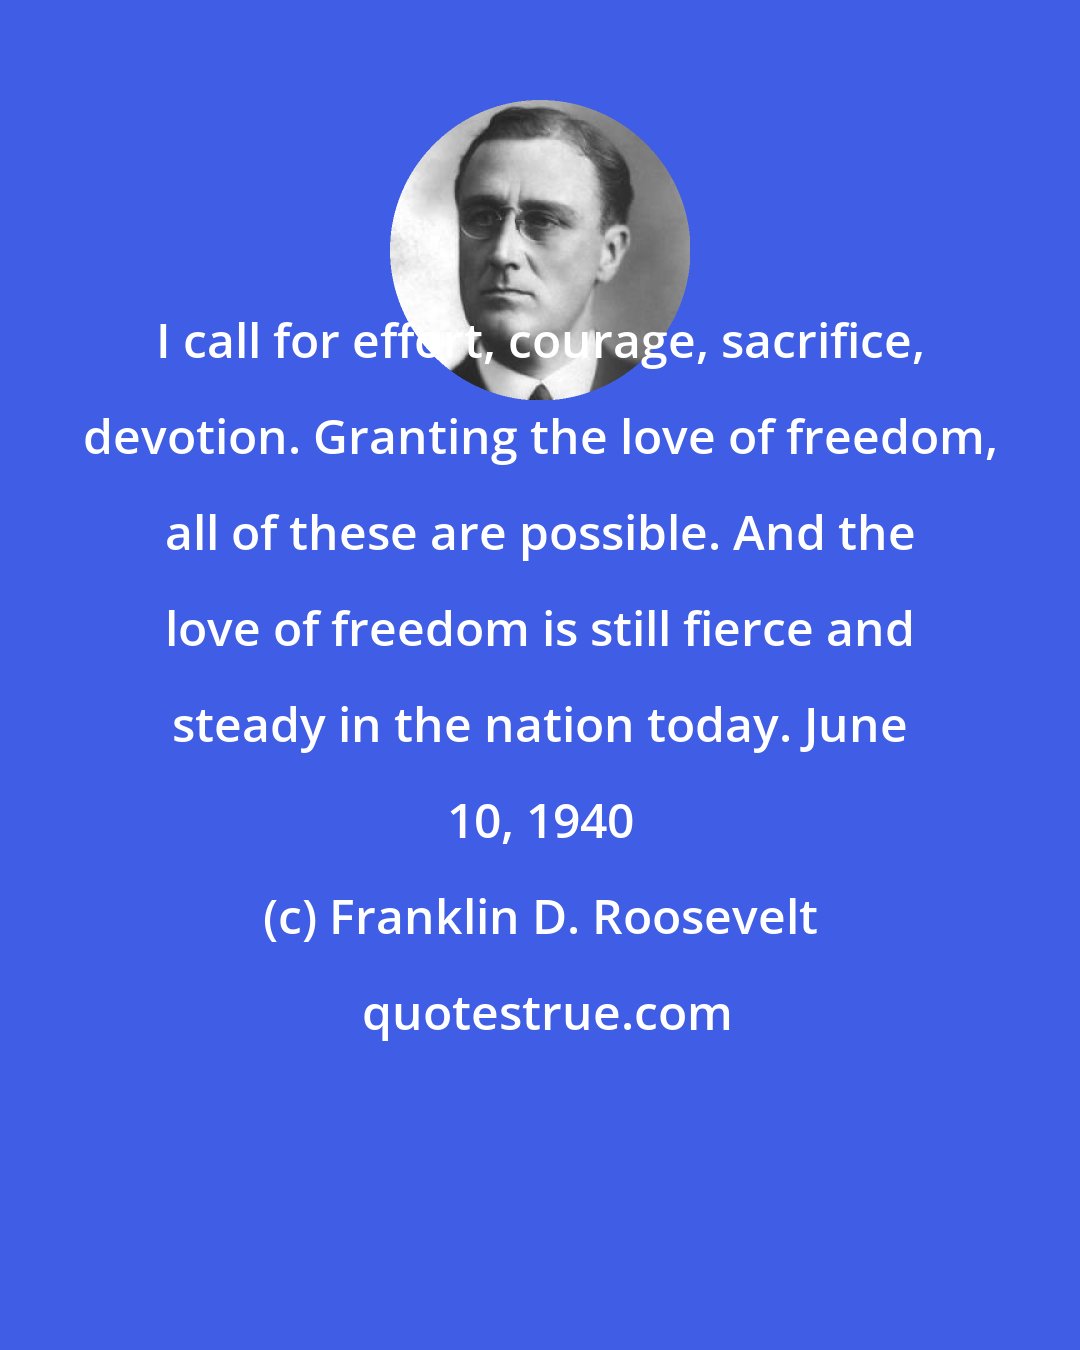 Franklin D. Roosevelt: I call for effort, courage, sacrifice, devotion. Granting the love of freedom, all of these are possible. And the love of freedom is still fierce and steady in the nation today. June 10, 1940